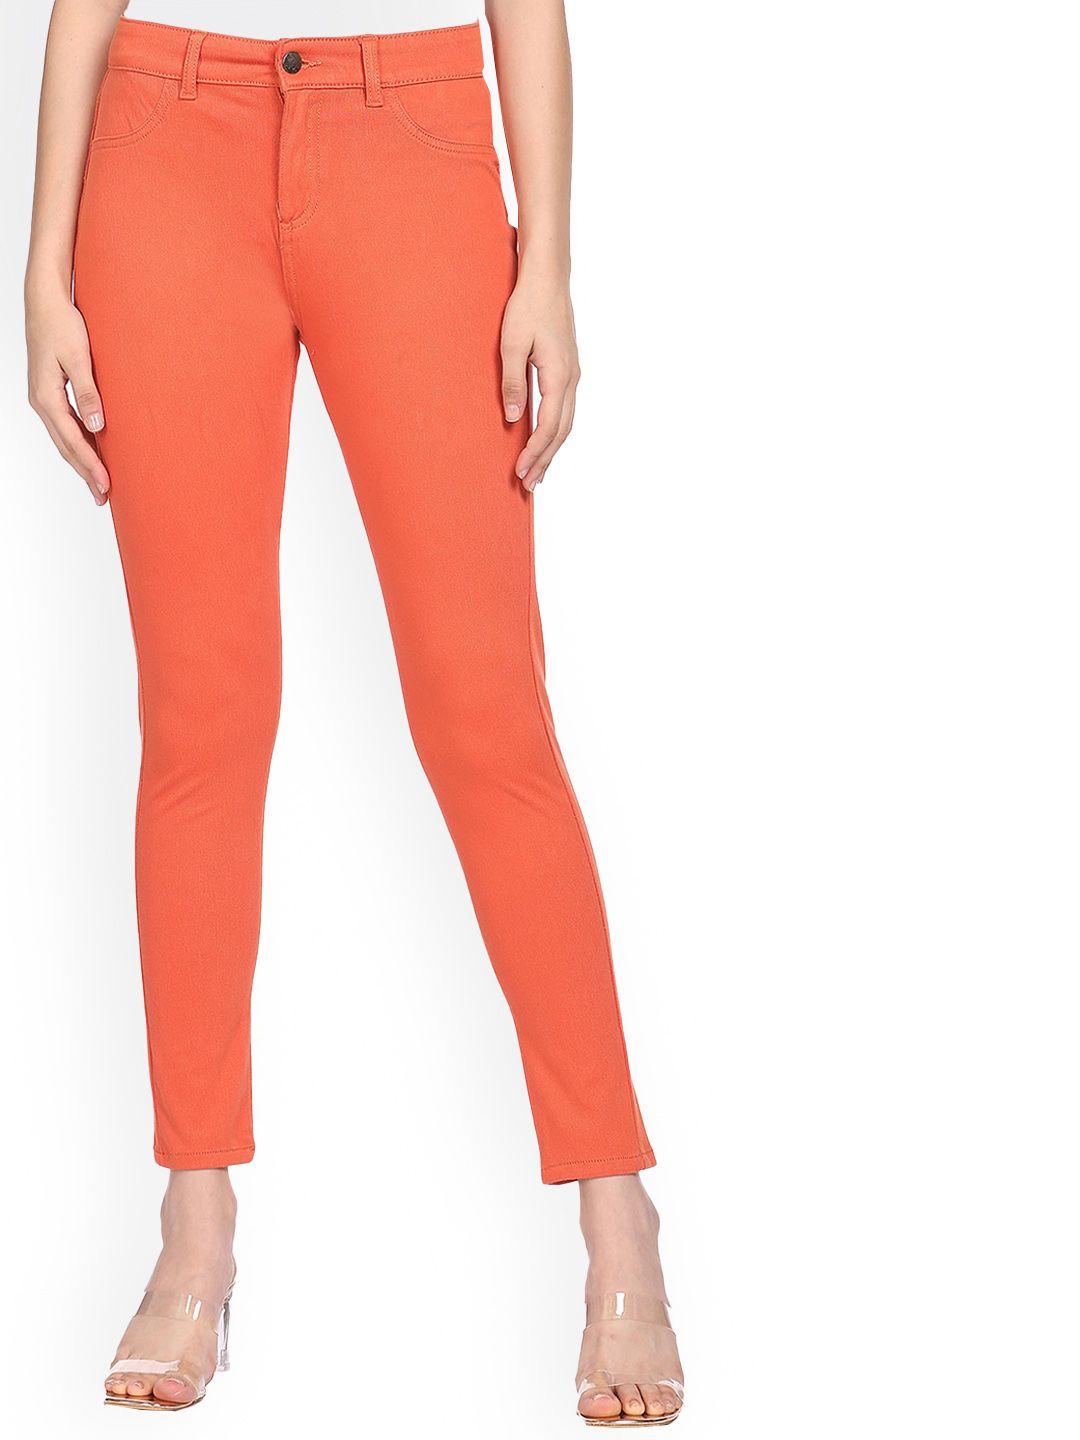 sugr-women-coral-mid-rise-solid-jeggings